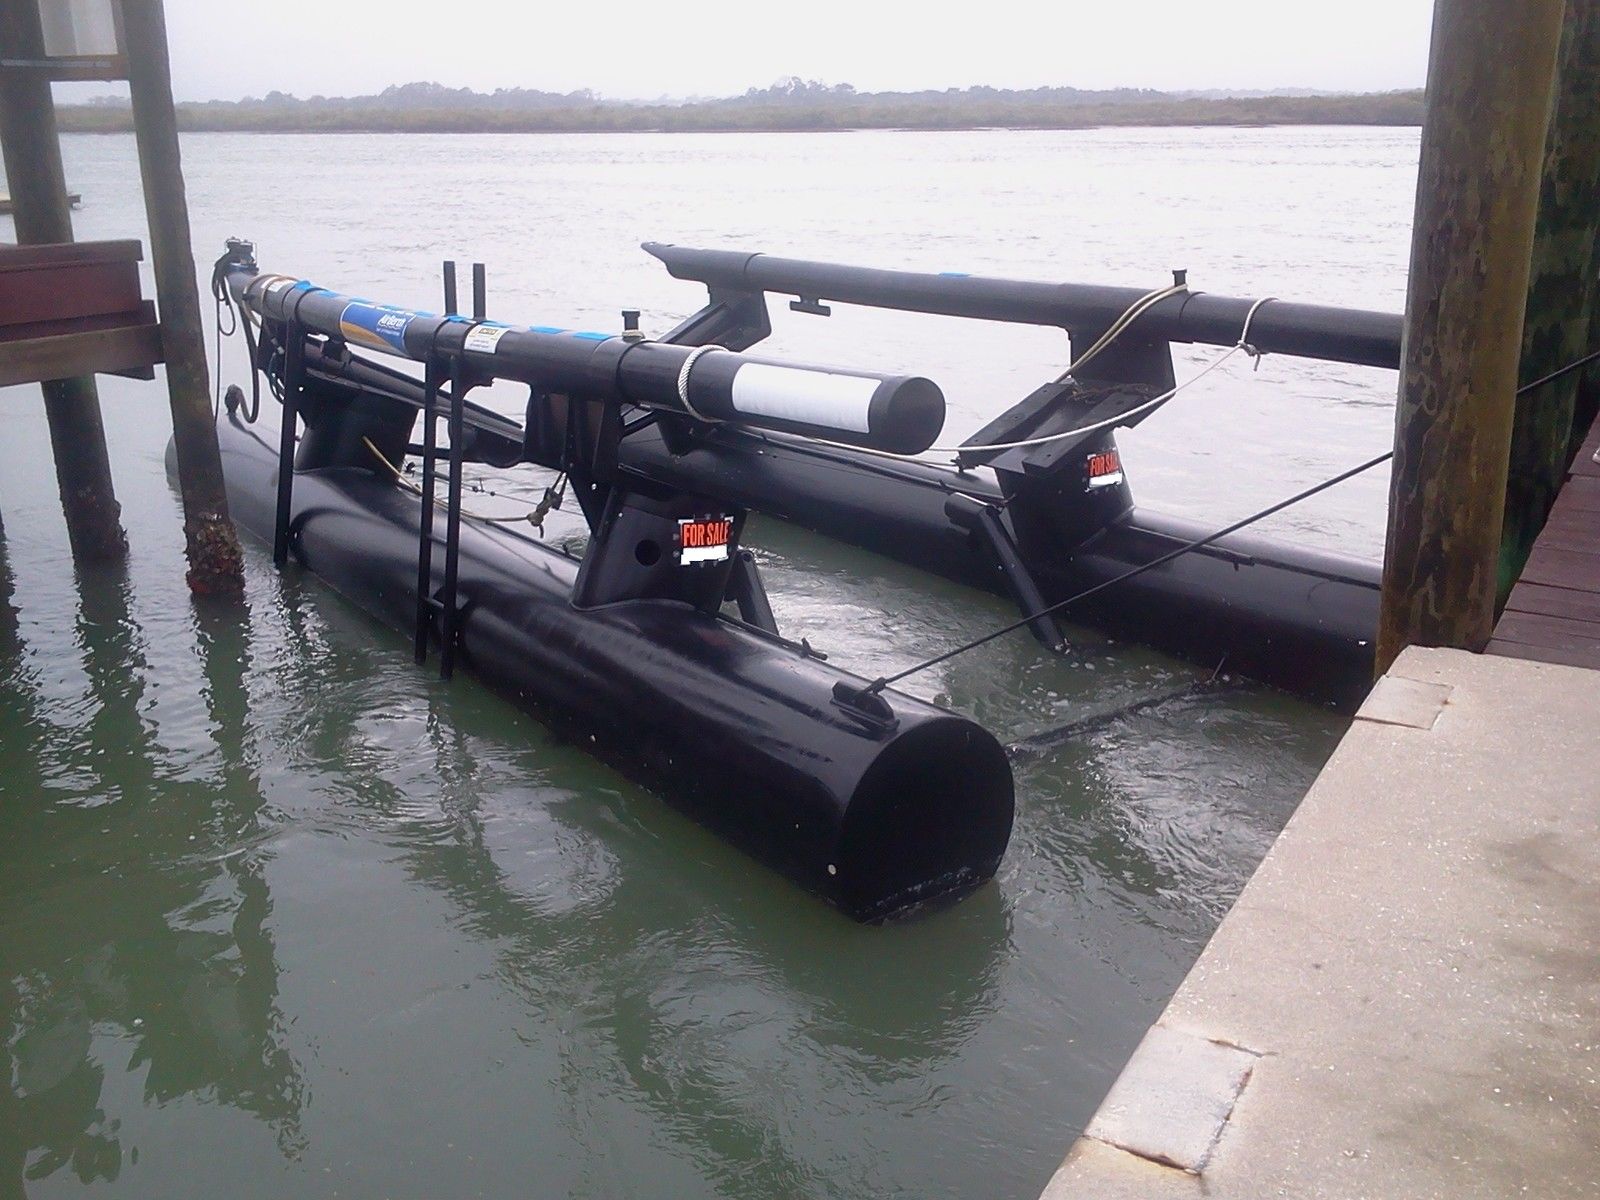 Air Berth Floating Boat Lift 2006 for sale for $15,000 - Boats-from ...